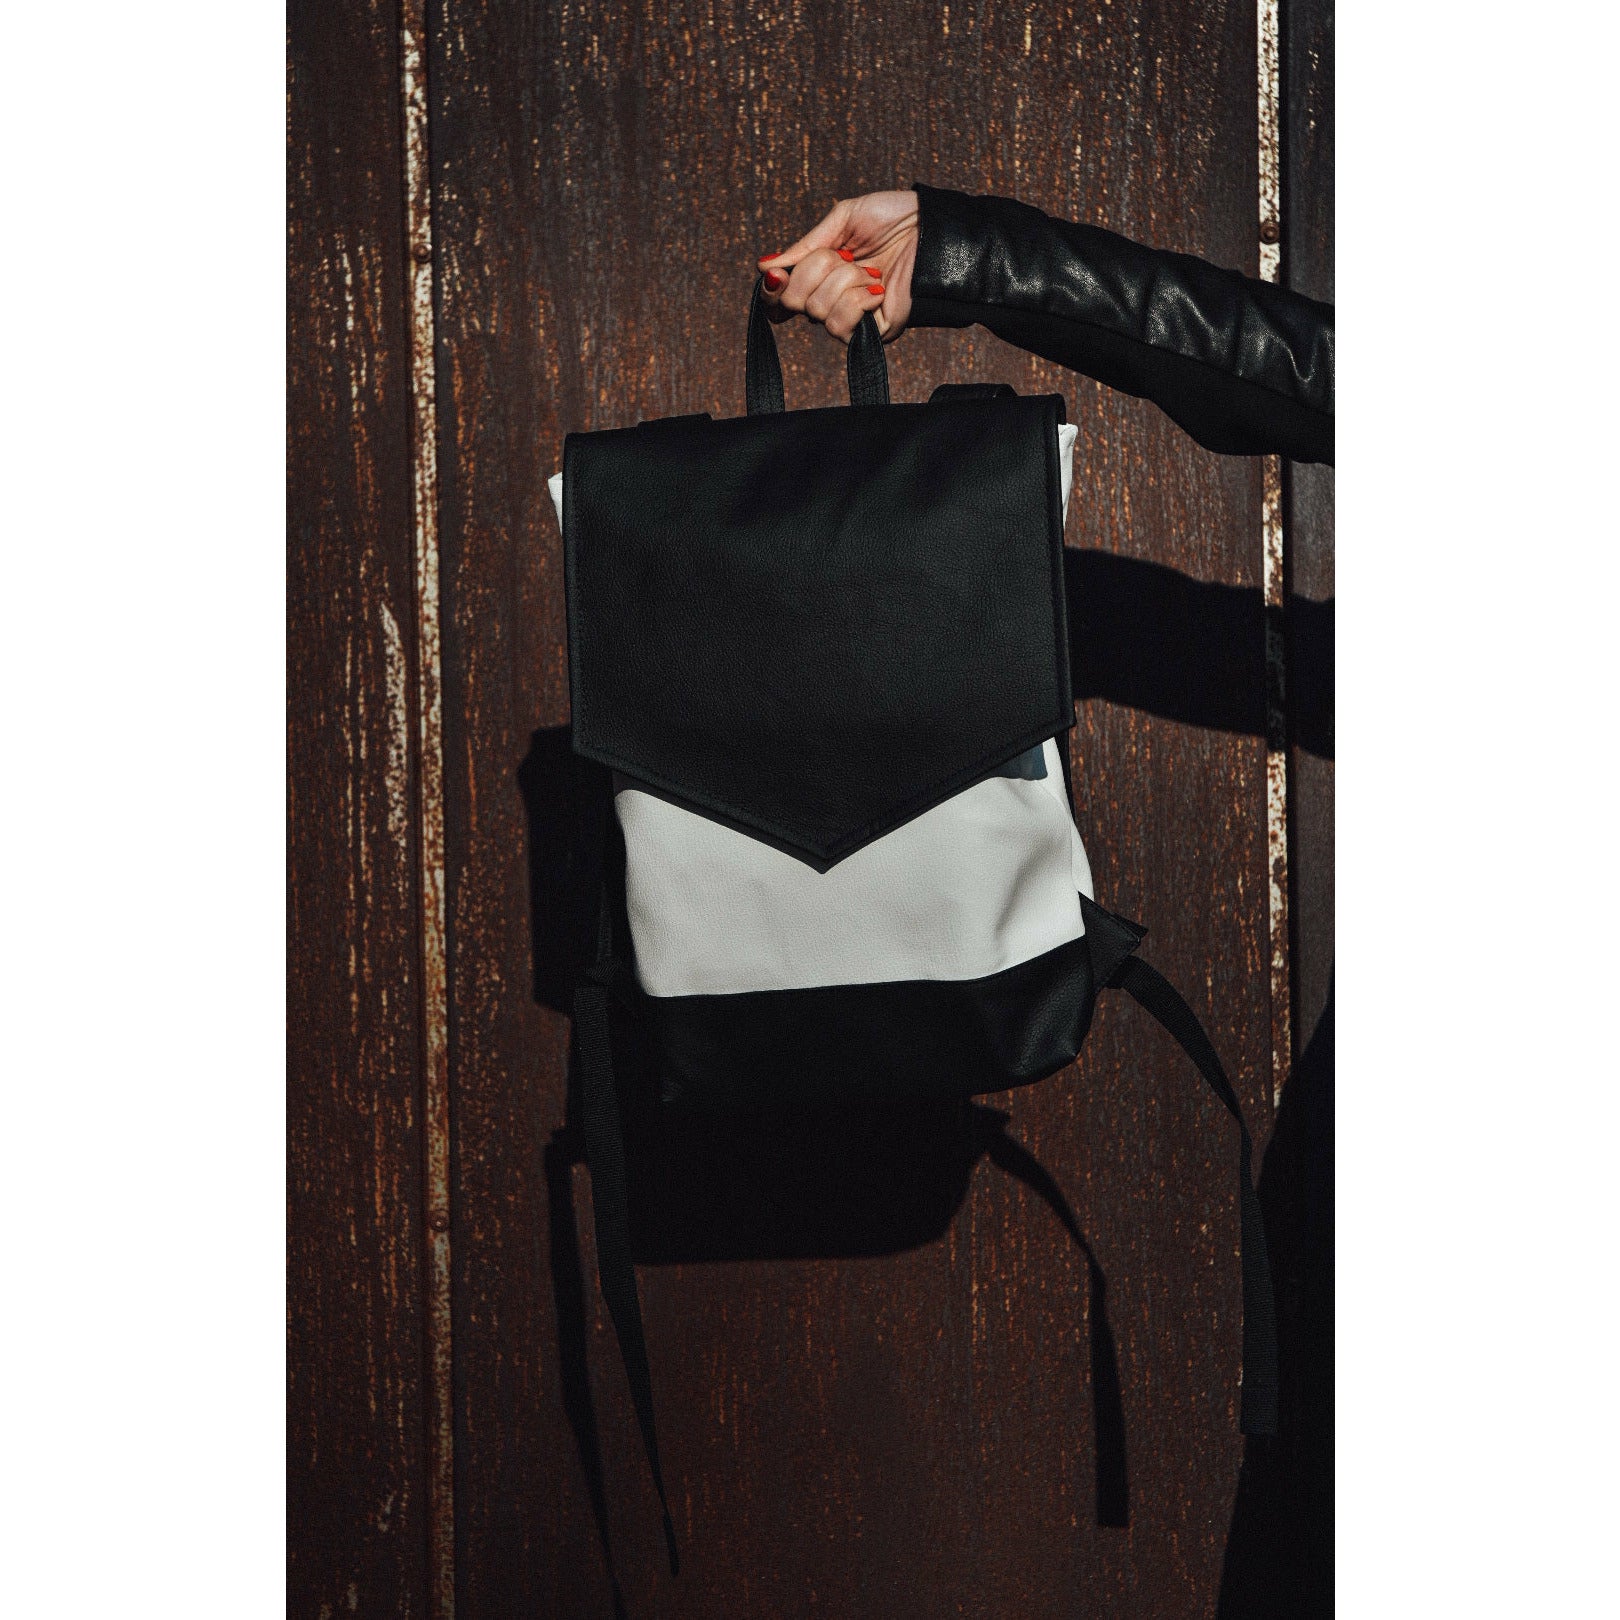 Convey Black&White Vegan Leather Backpack